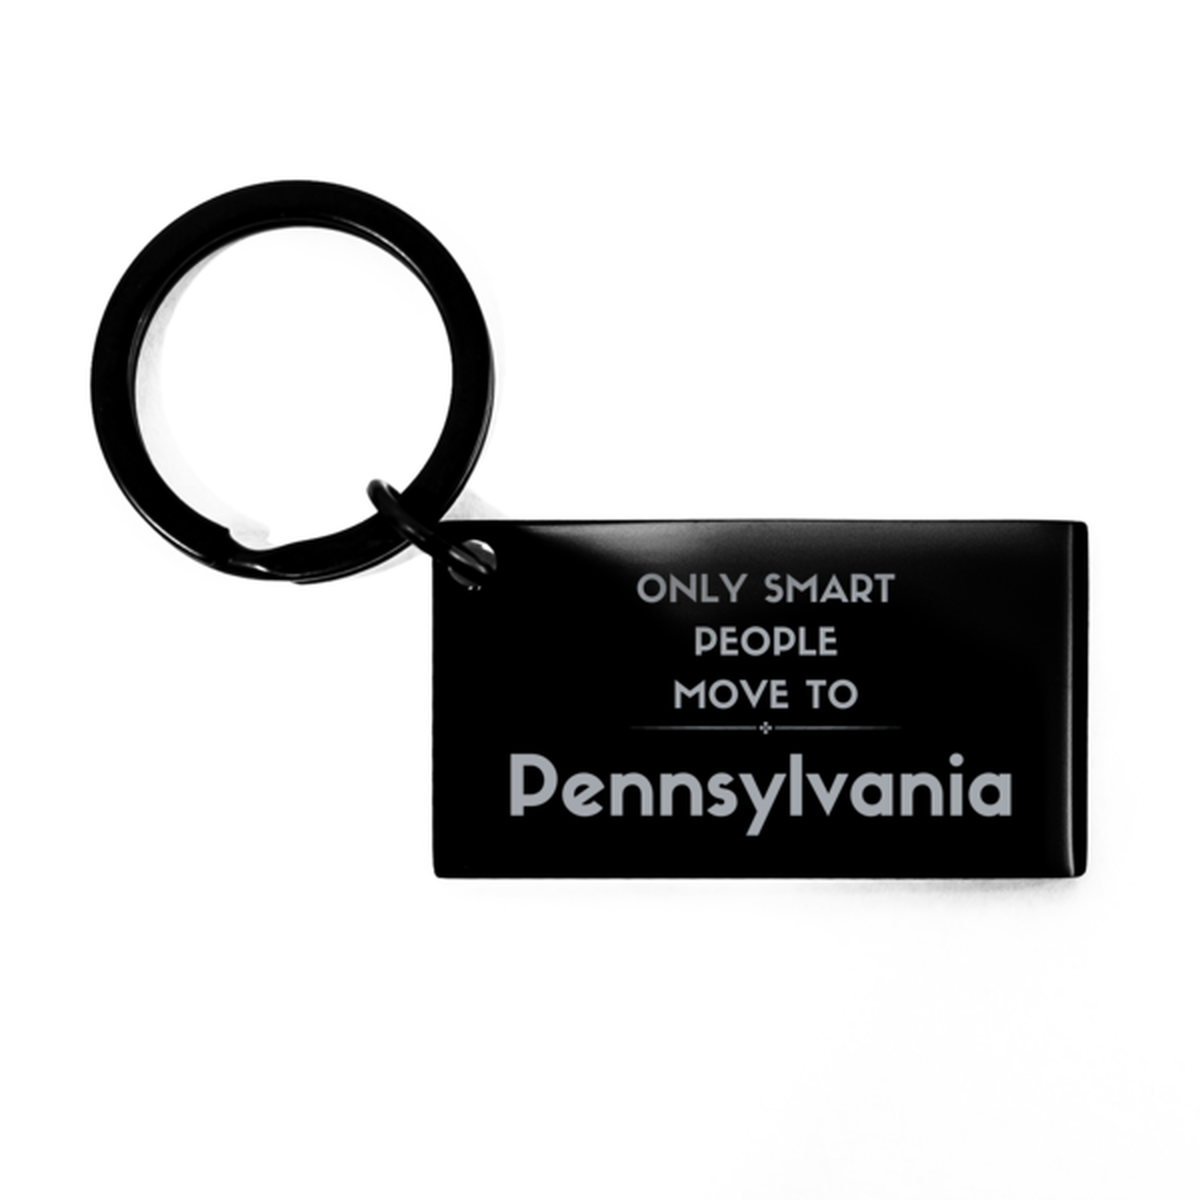 Only smart people move to Pennsylvania Keychain, Gag Gifts For Pennsylvania, Move to Pennsylvania Gifts for Friends Coworker Funny Saying Quote